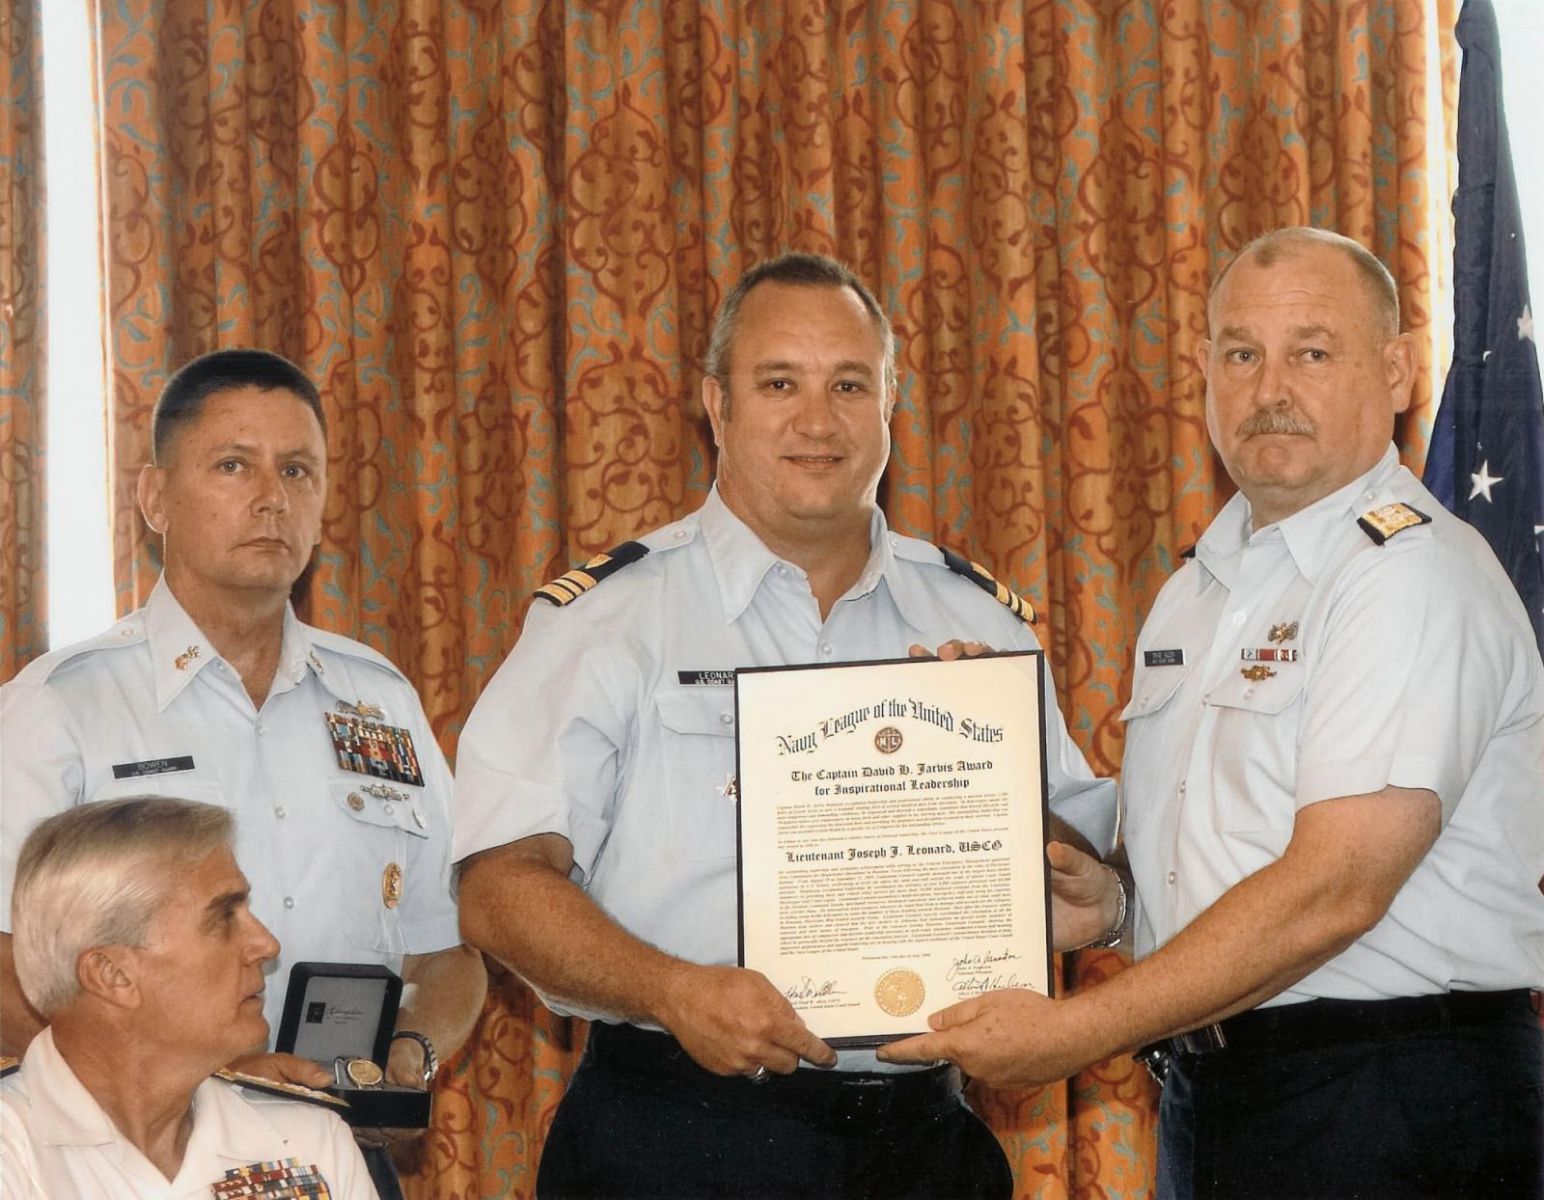 Receiving the Jarvis Award from ADM Allen